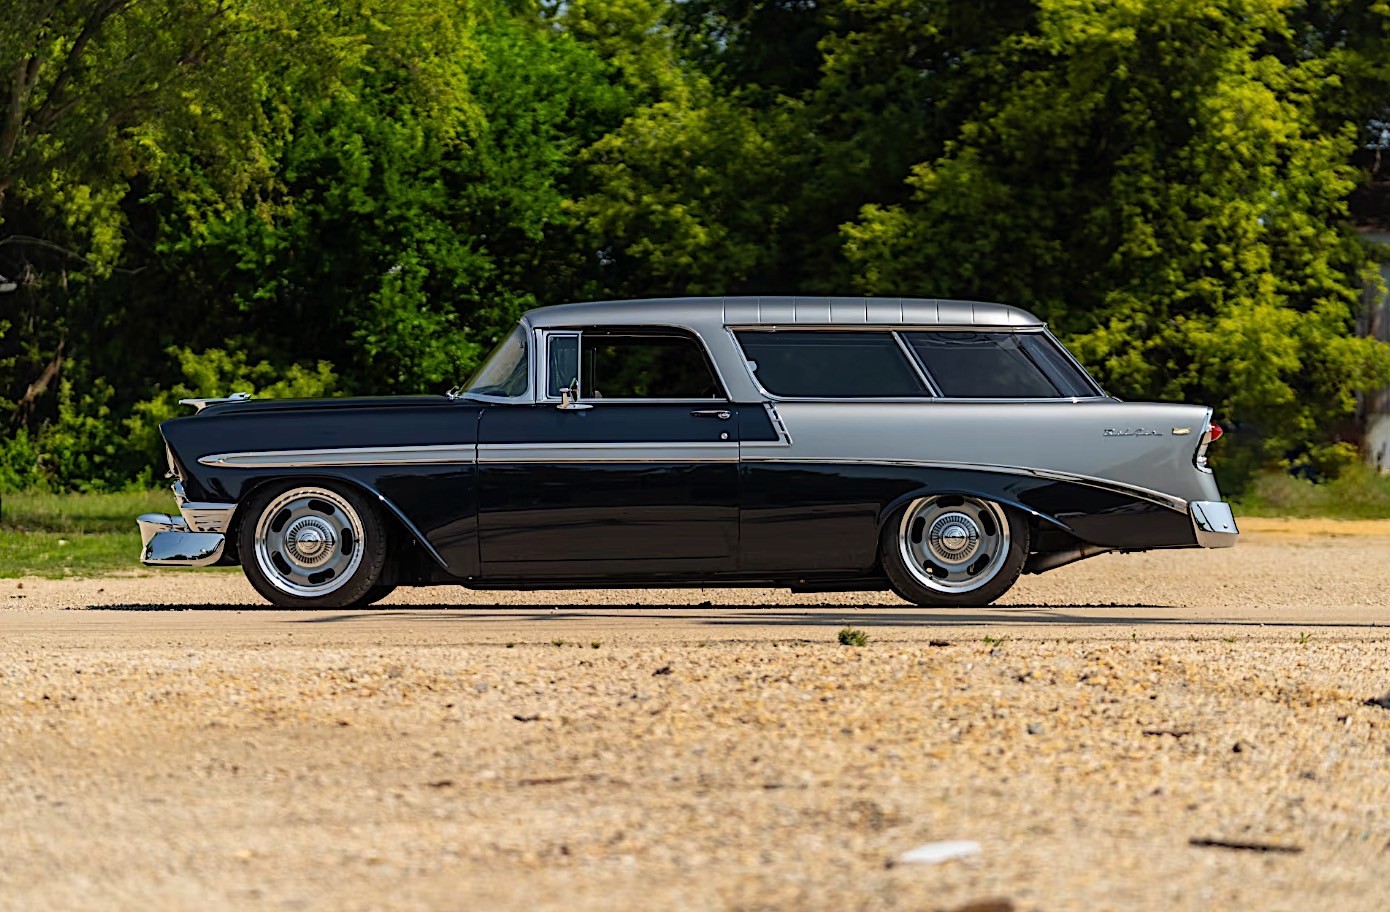 custom 1956 chevrolet nomad turns its back on $125,000 bid, tri-five refuses to sell